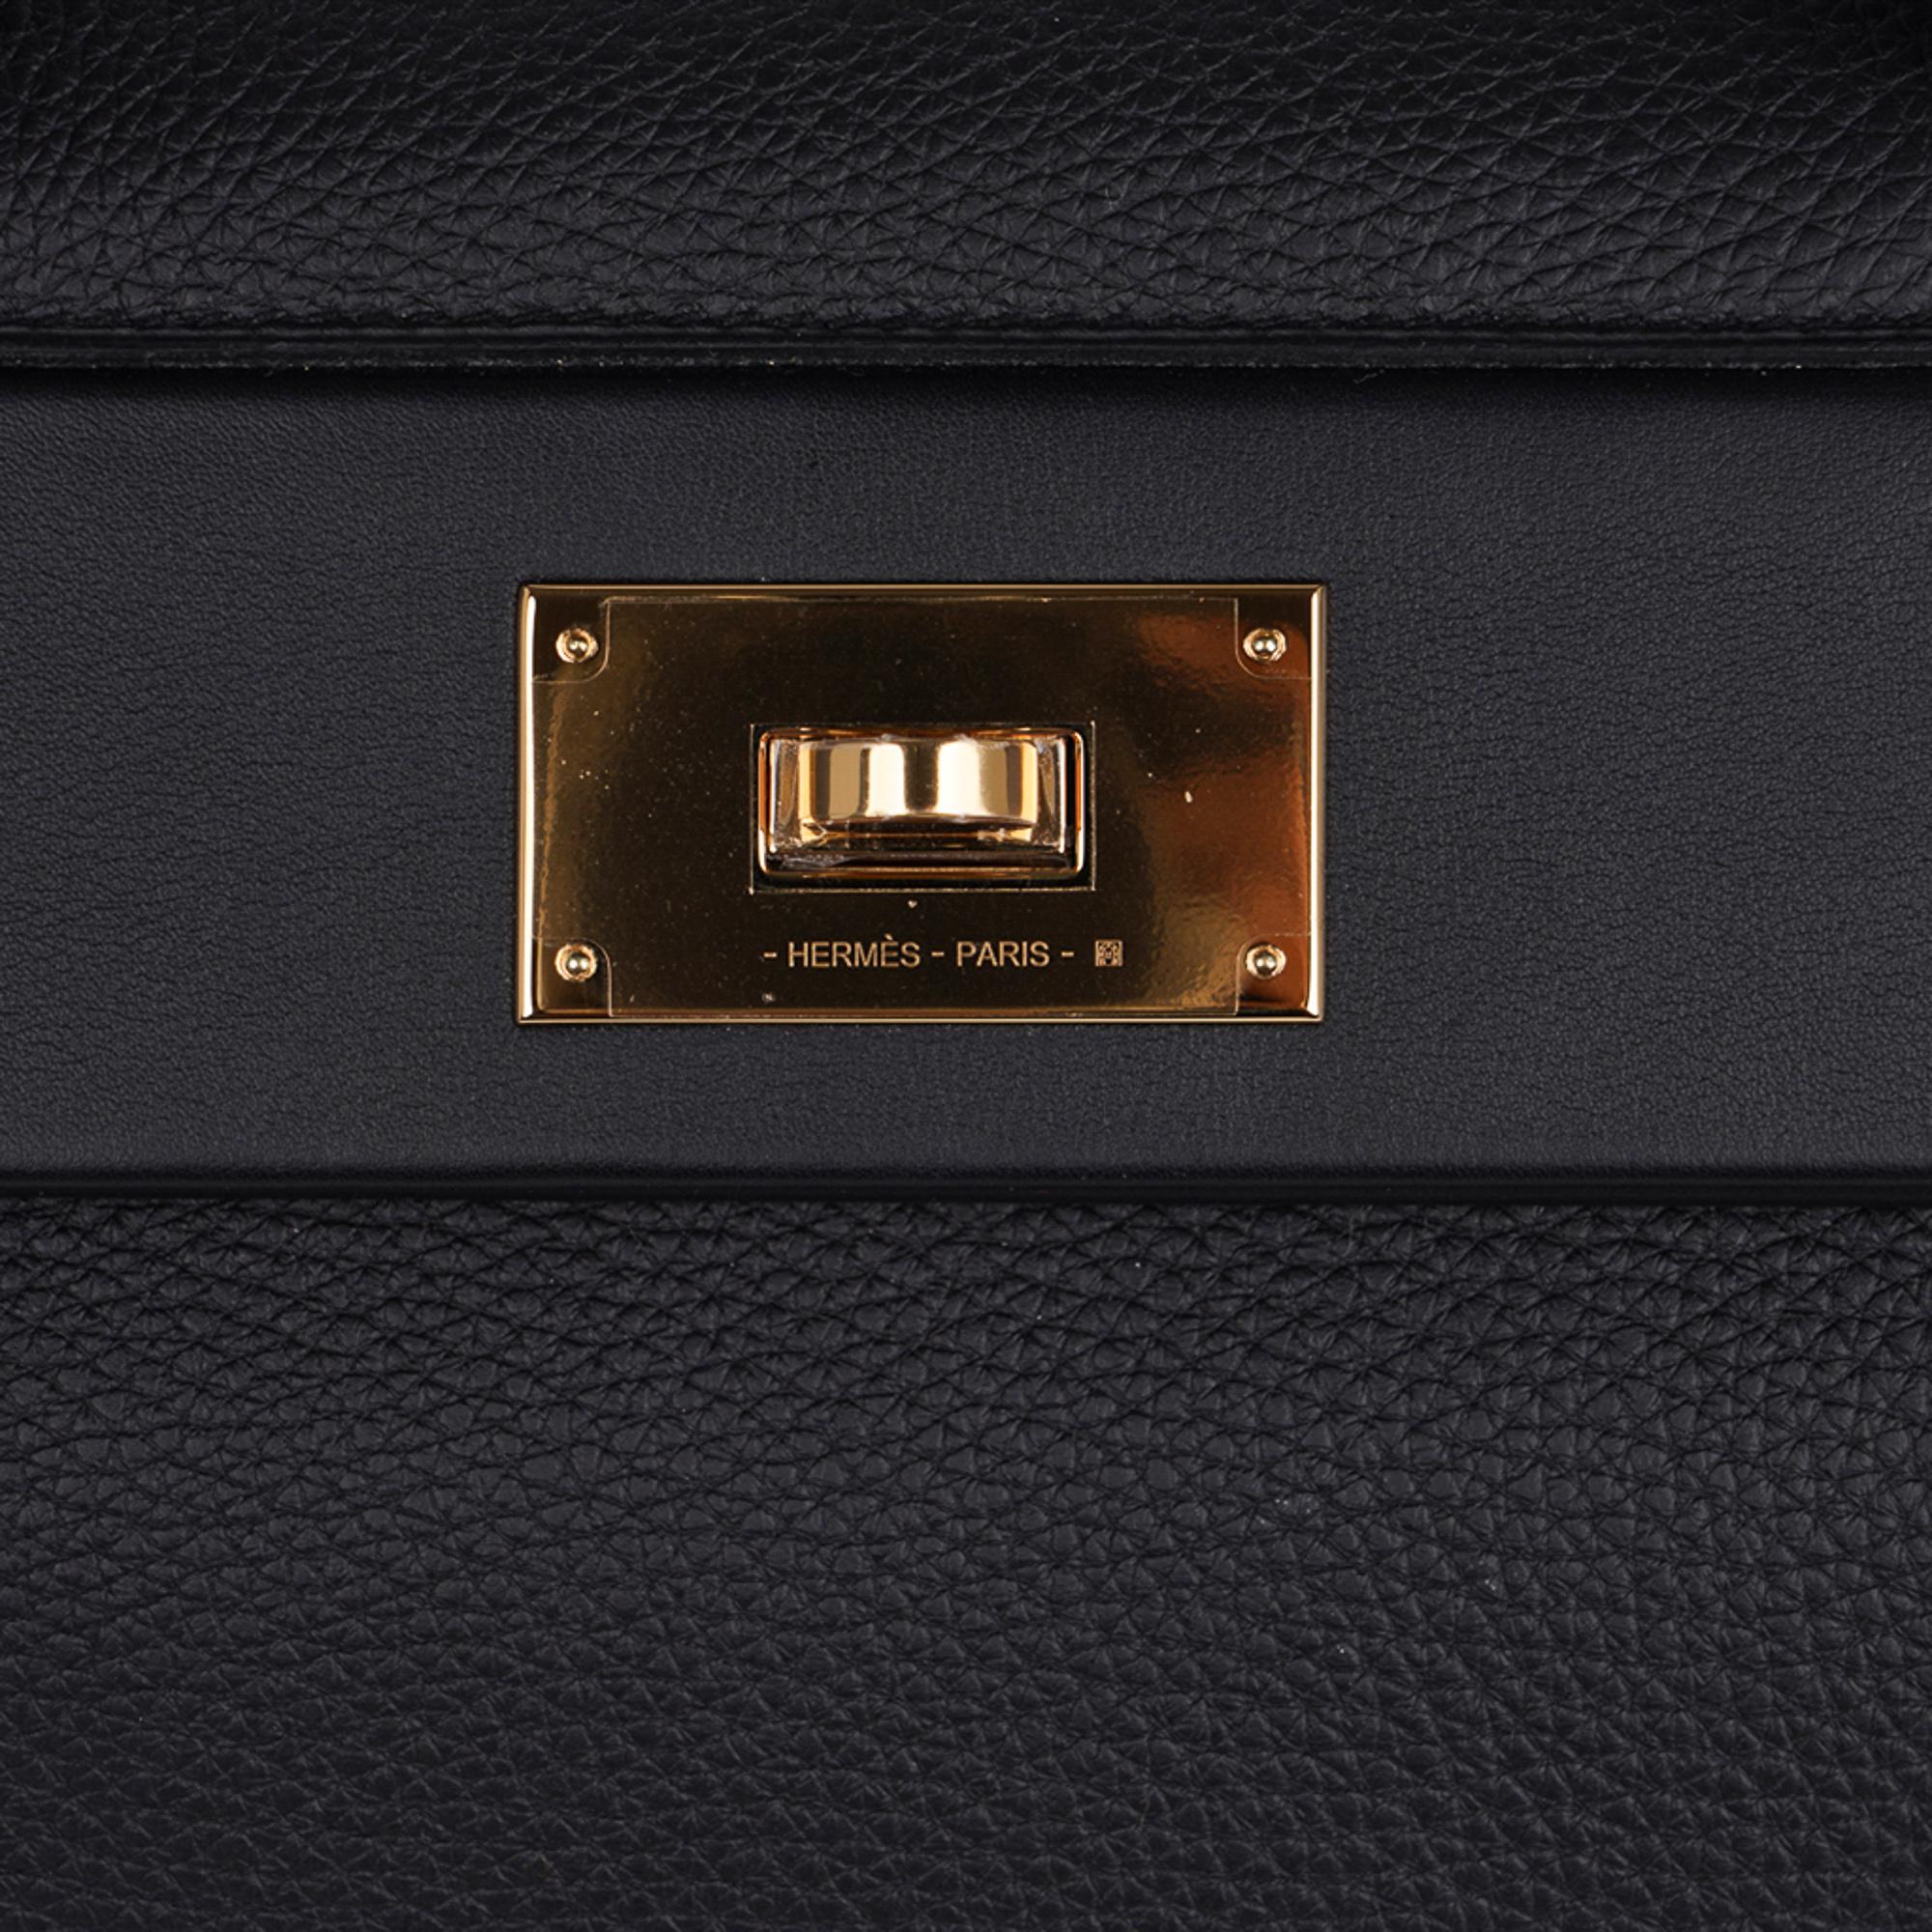 Mightychic offers a guaranteed authentic Hermes 24/24 29 bag featured in classic Black.
Slouchy, chic as has style whether worn as a top handle, shoulder or crossbody bag.
Richly accentuated with Gold hardware.
Clemence leather with Swift leather